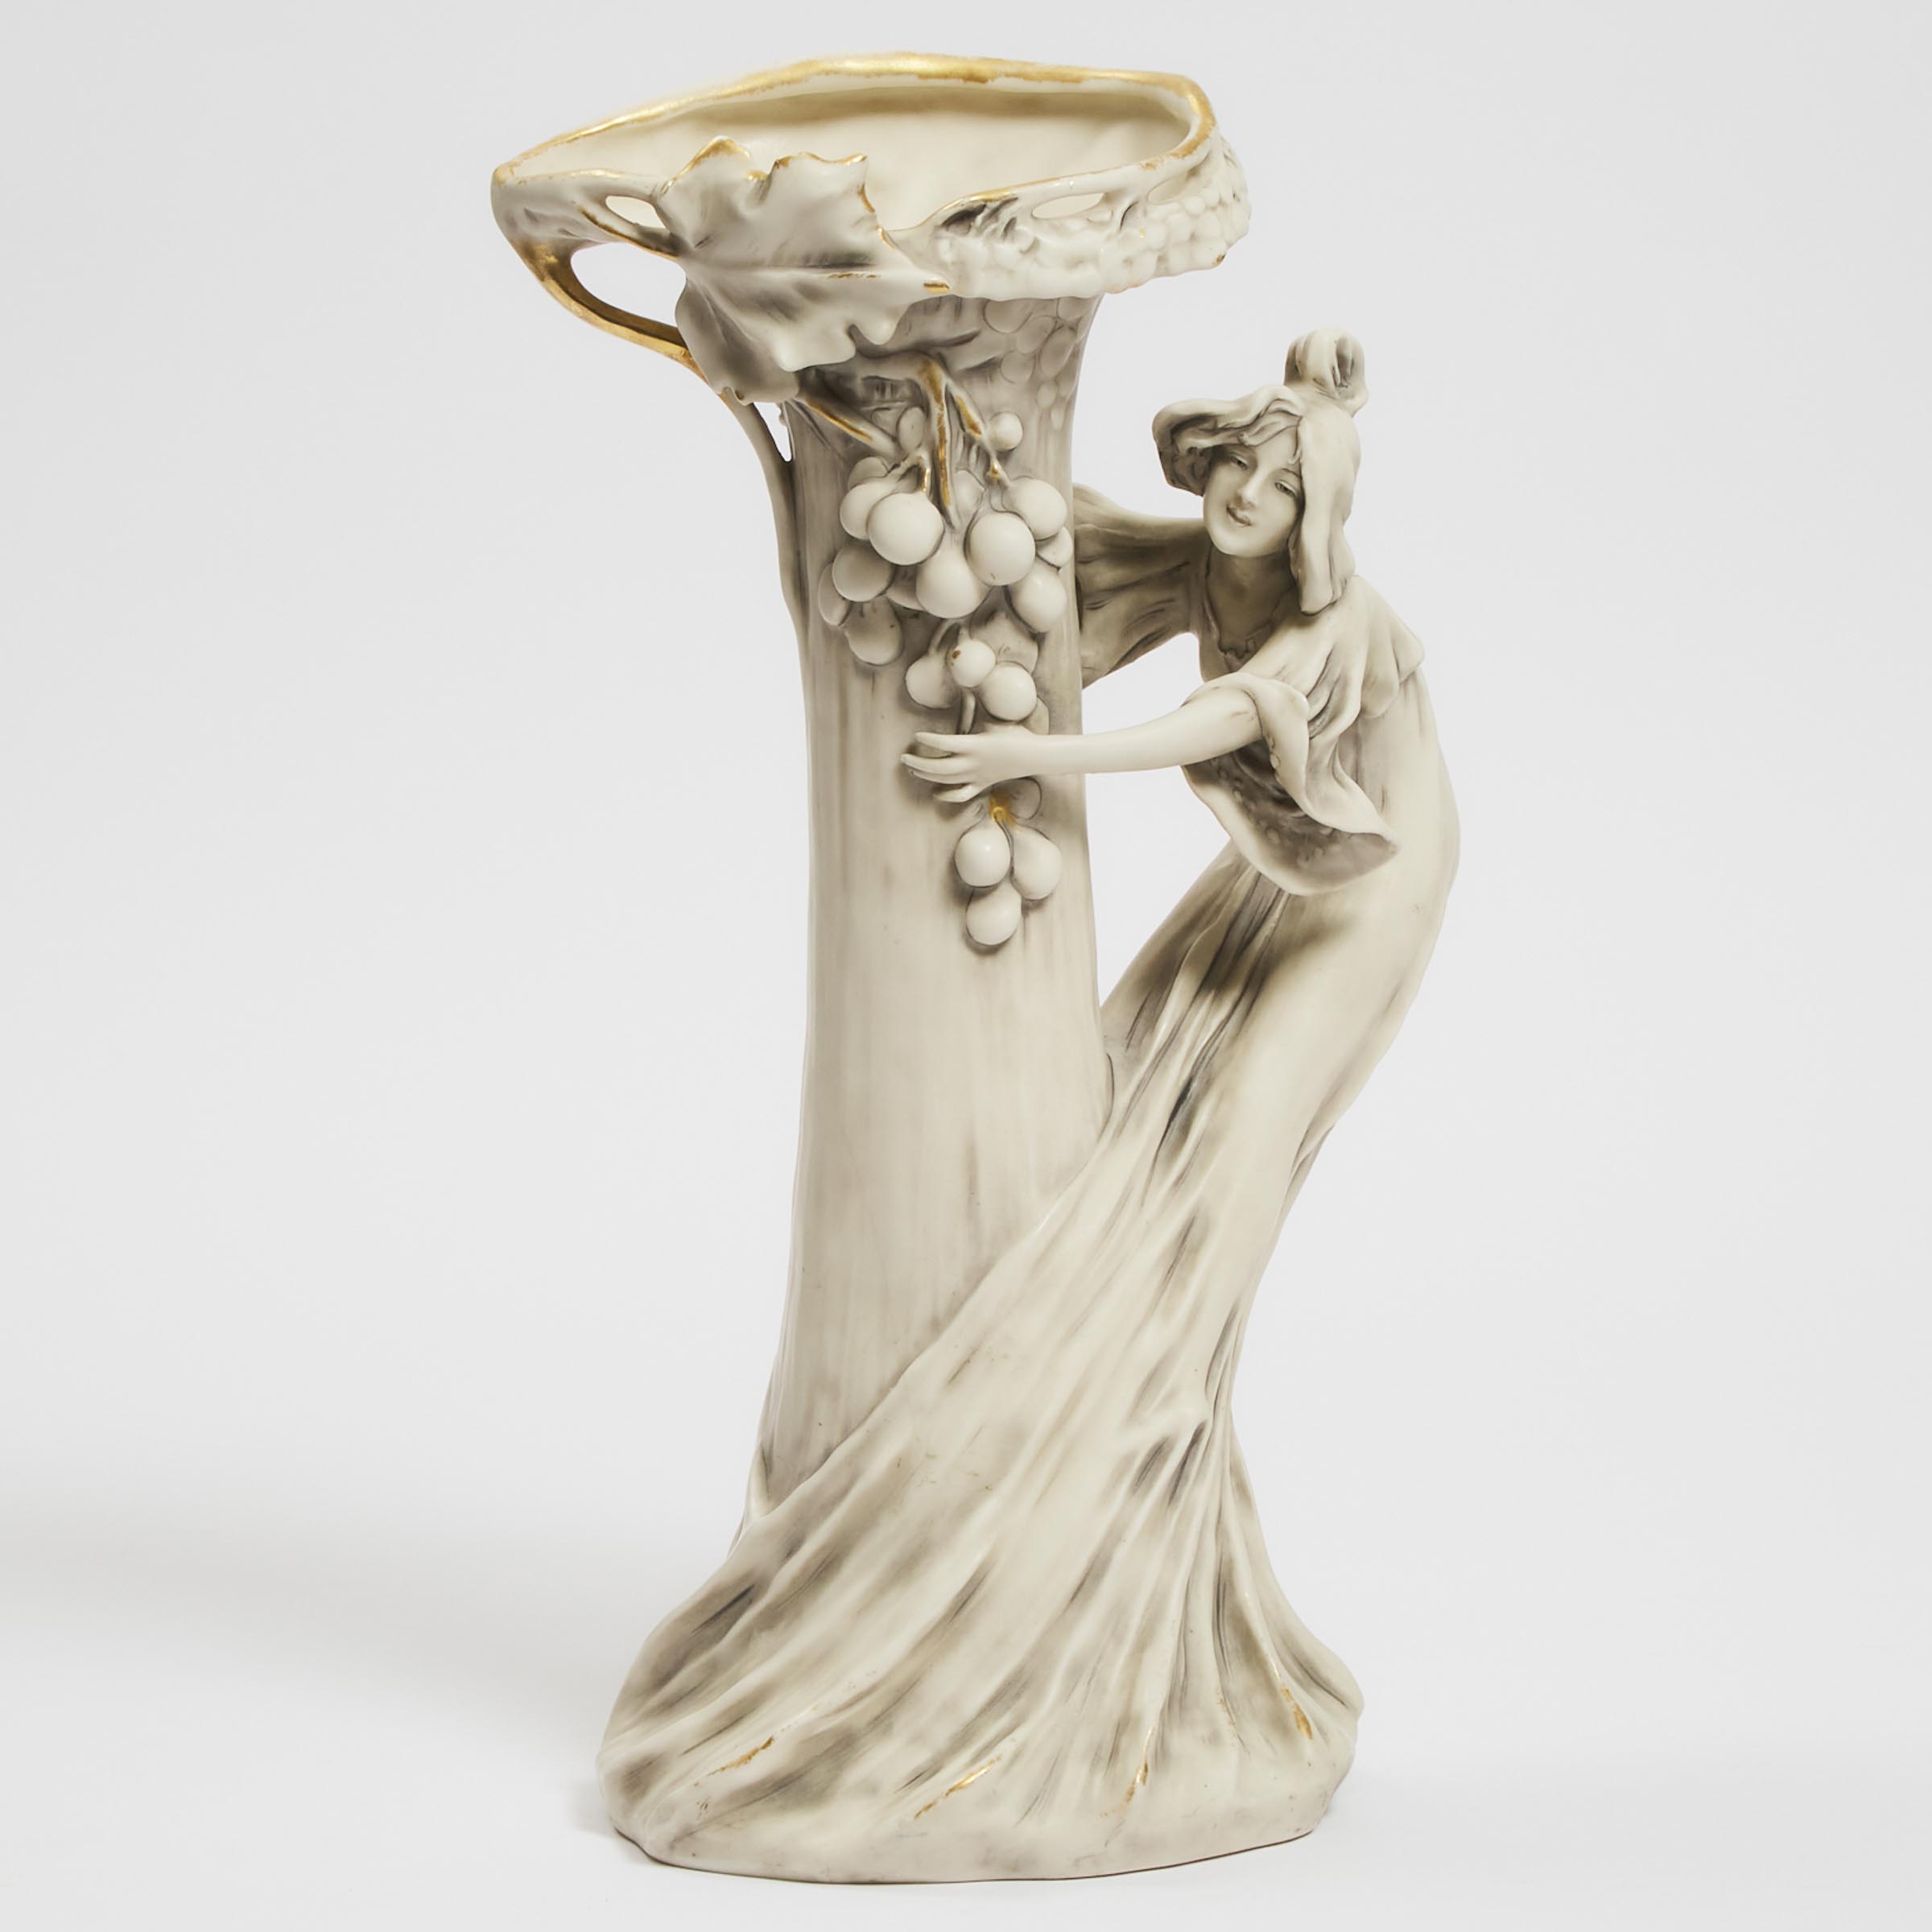 Royal Dux Figural Vase, early 20th century